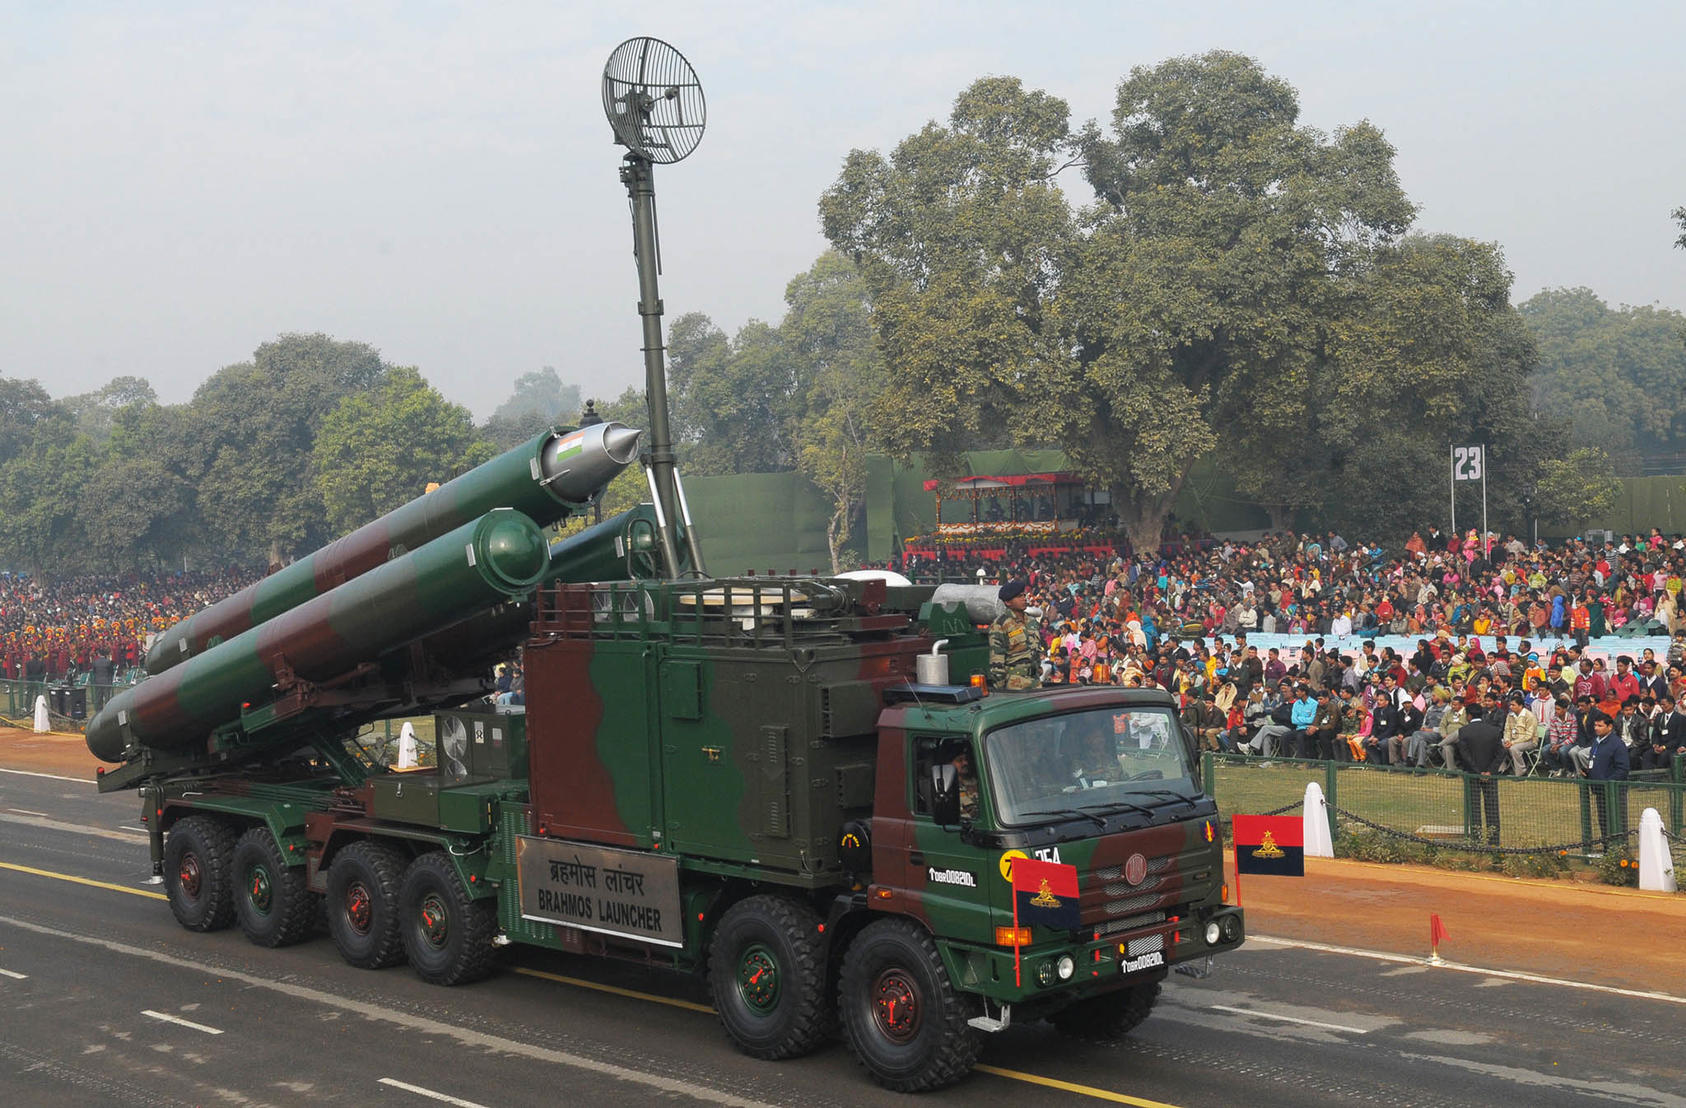 A Brahmos launcher during a rehearsal for the India’s 2011 Republic Day Parade. In 2021, an India Brahmos missile test misfired into Pakistani territory, sparking concerns of escalation between the rival nuclear powers. (Press Information Bureau)